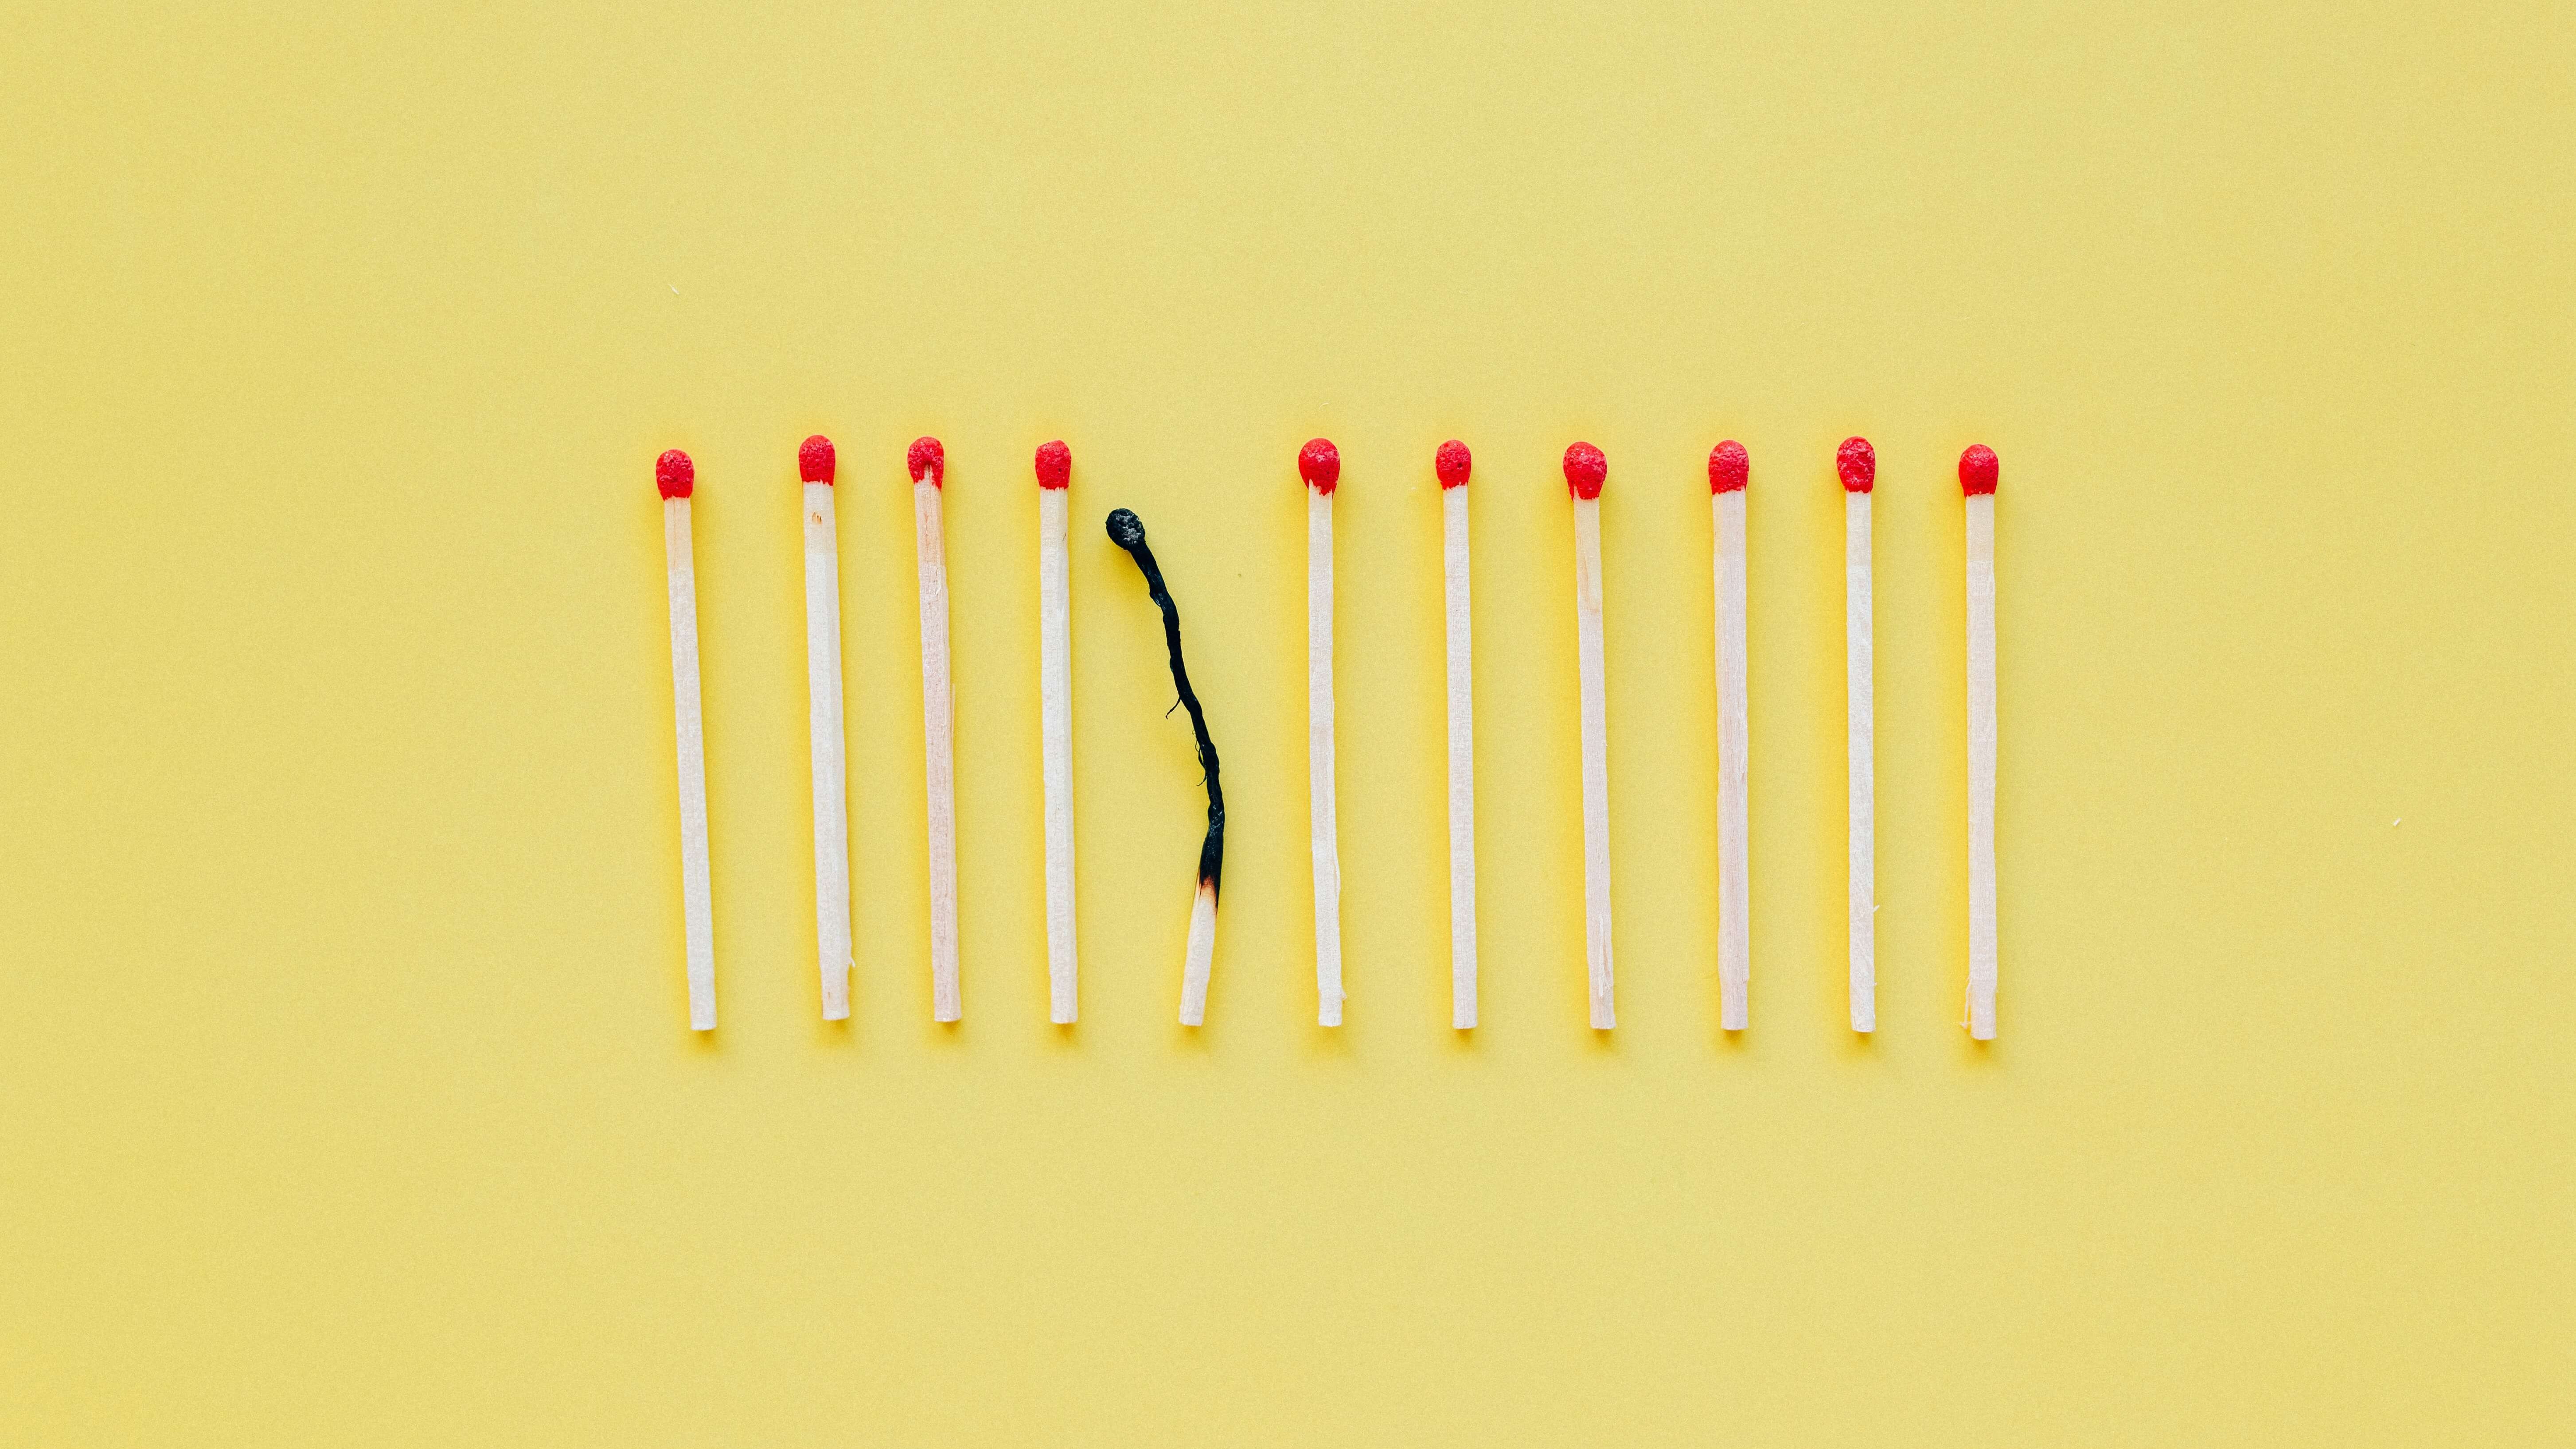 A single burnt match in a group of matches